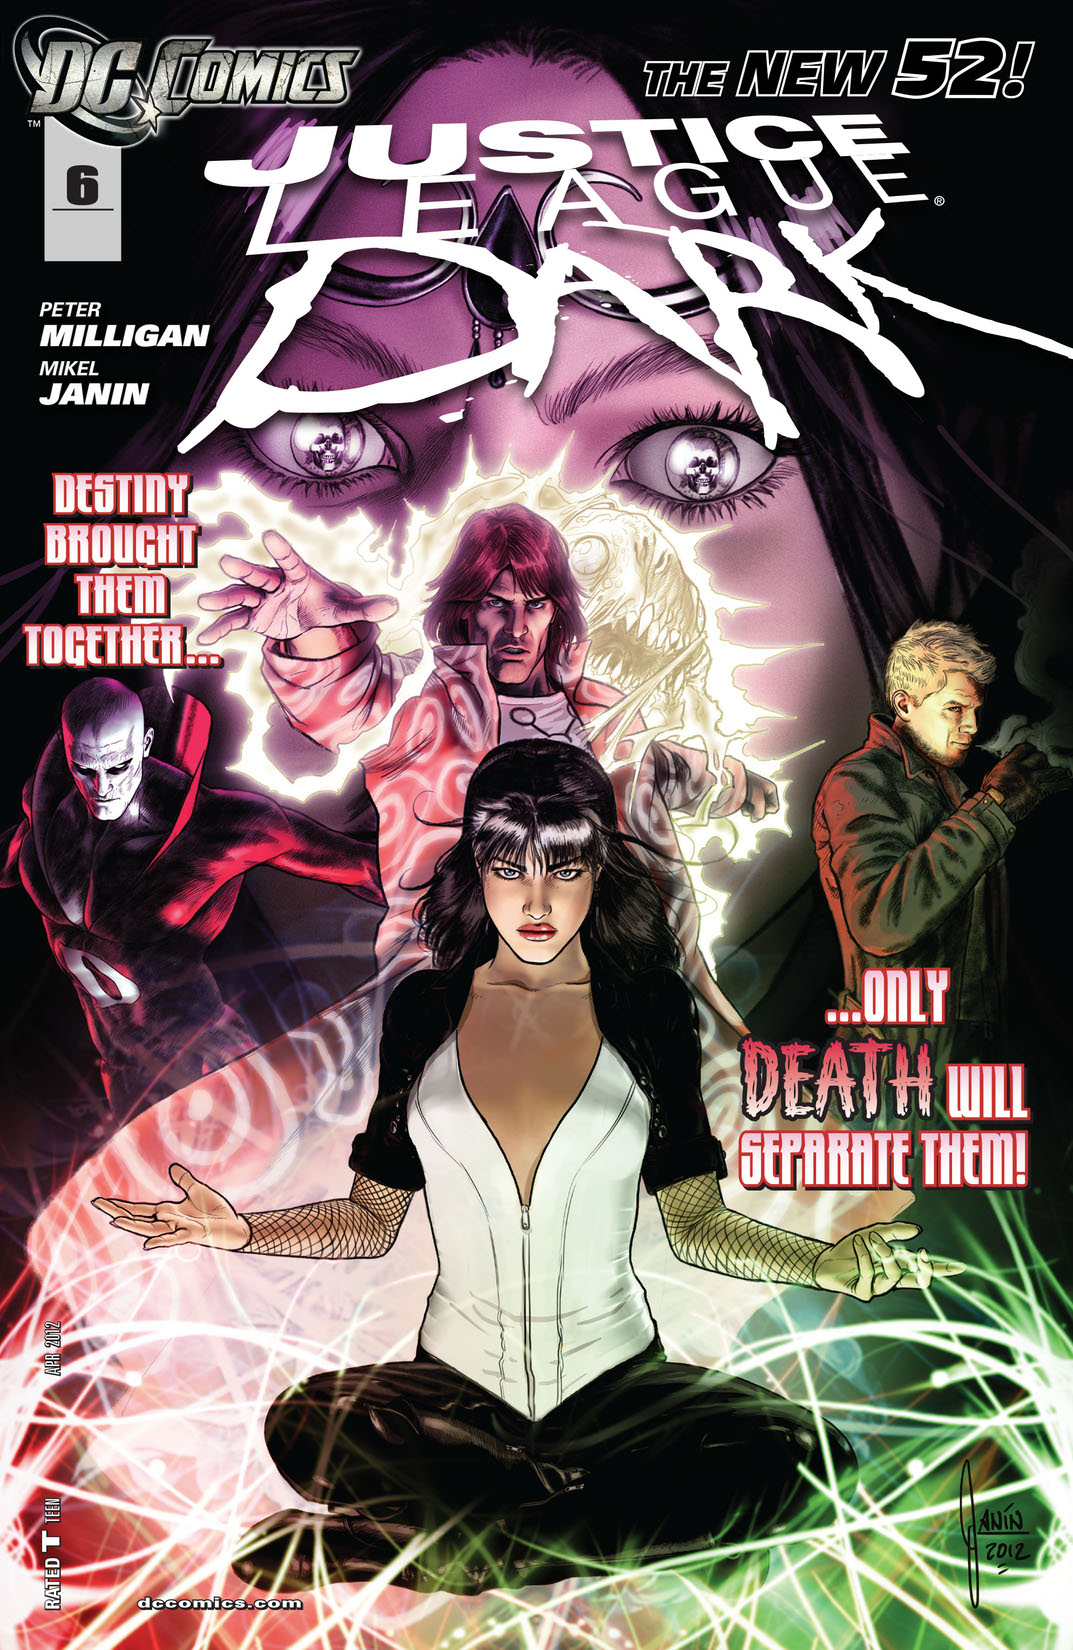 Justice League Dark (2011-) #6 preview images